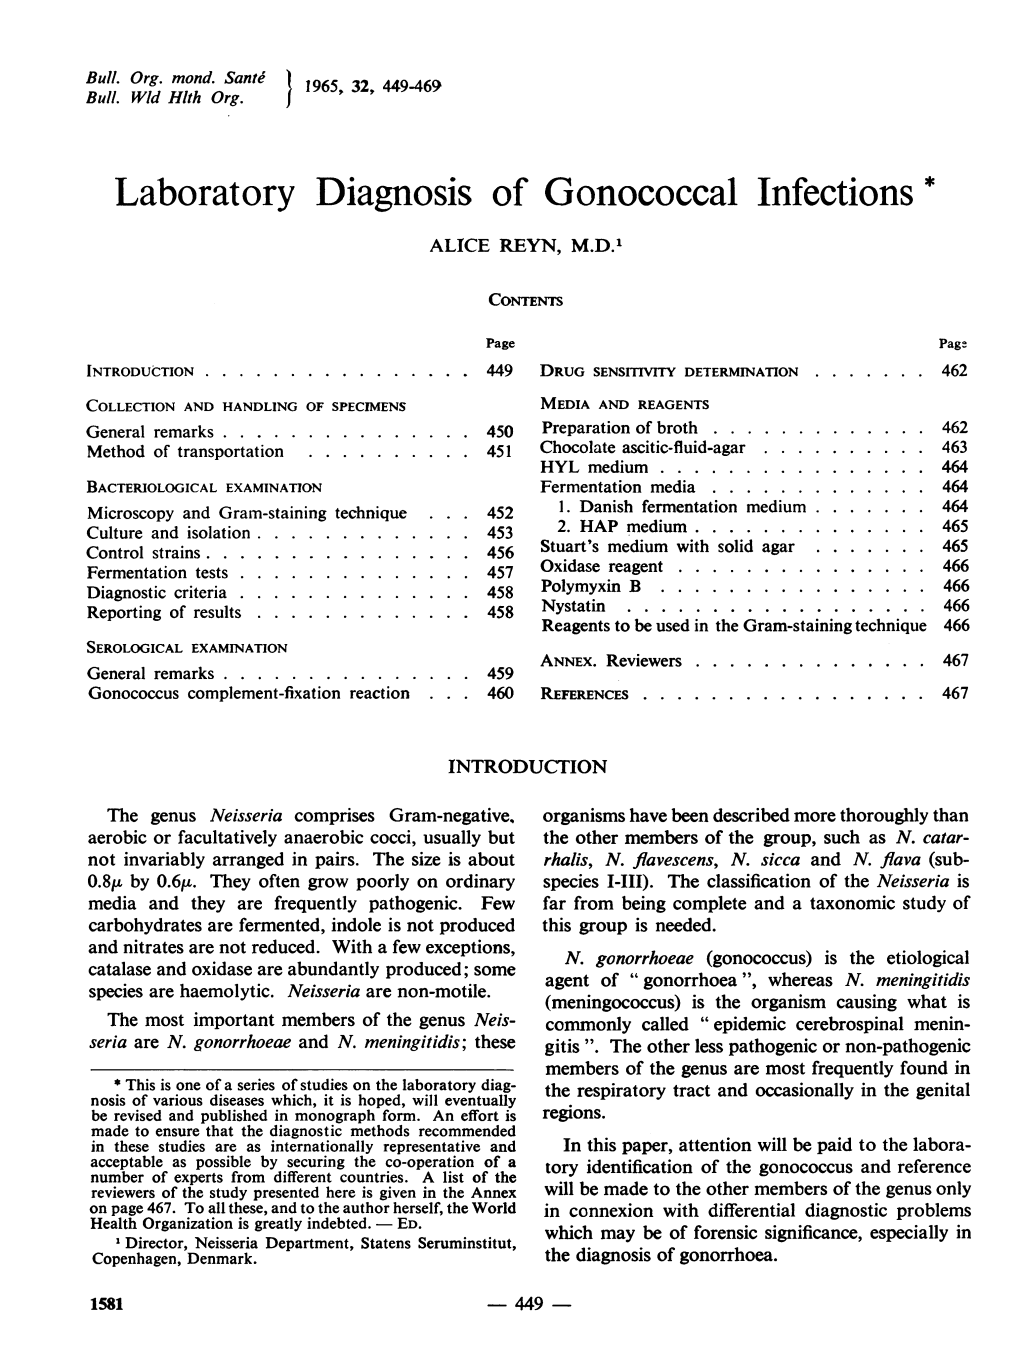 Laboratory Diagnosis of Gonococcal Infections * ALICE REYN, M.D.'